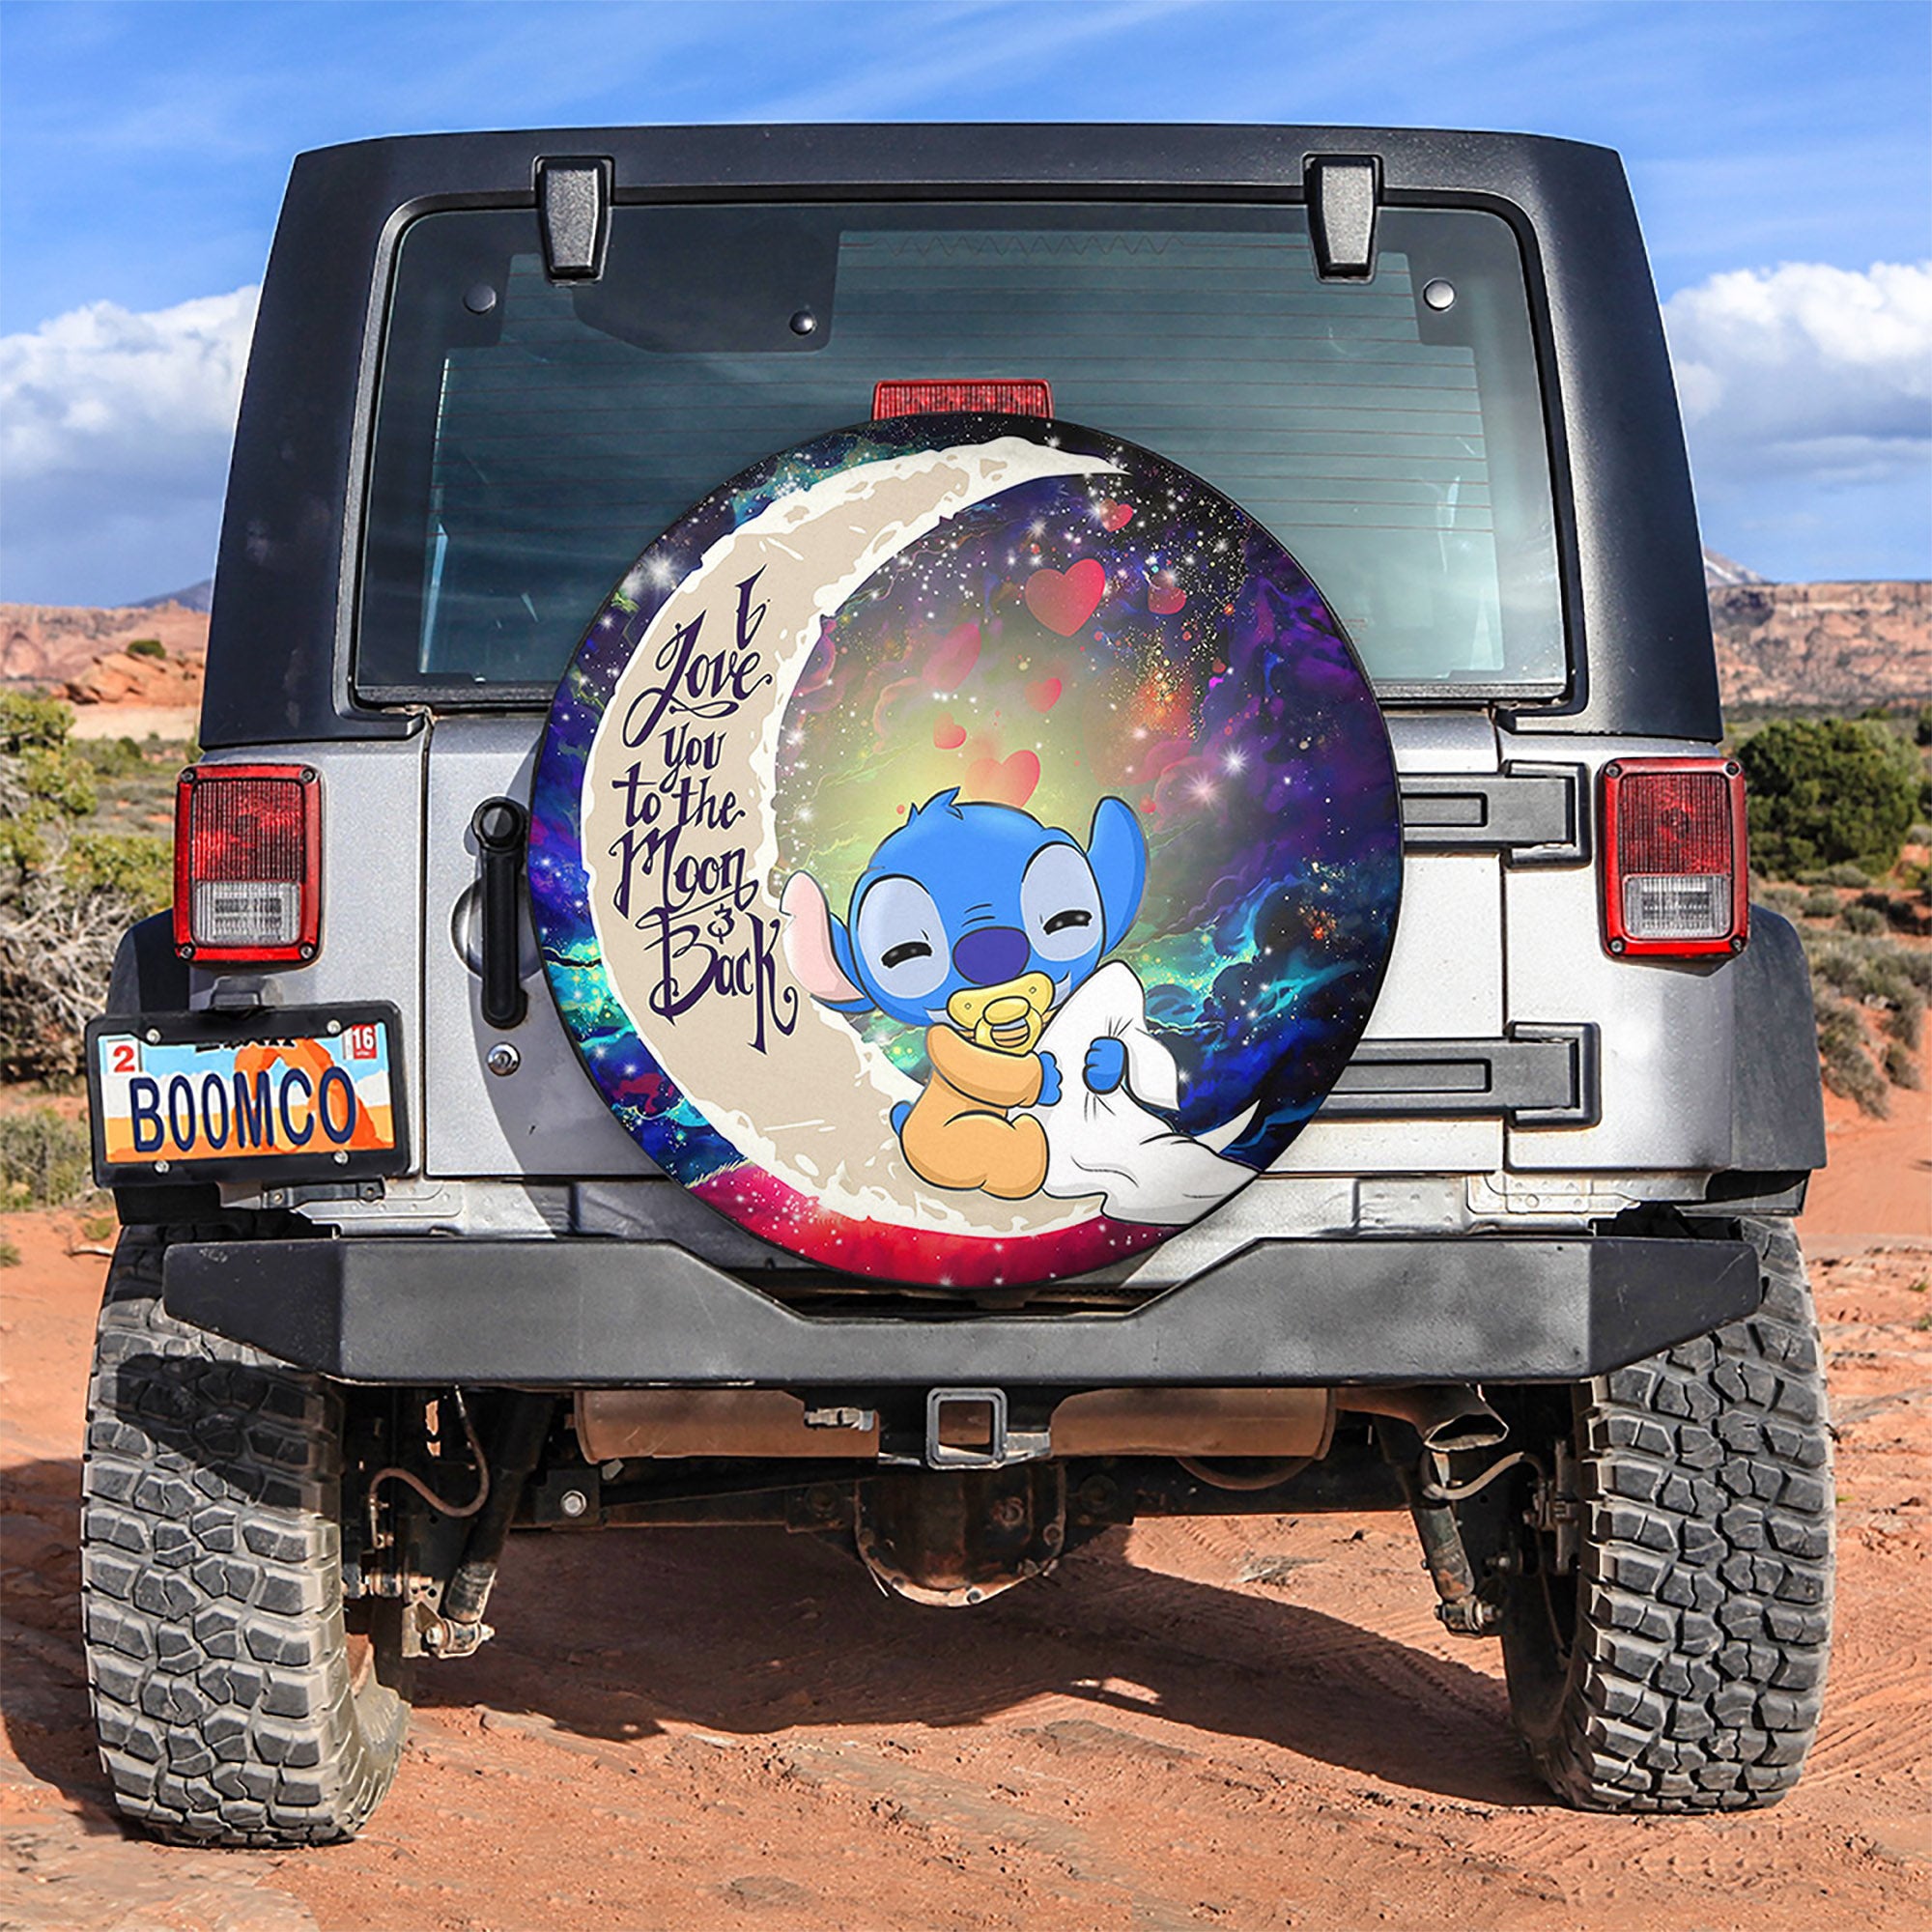 Cute Baby Stitch Sleep Love You To The Moon Galaxy Spare Tire Covers Gift For Campers Nearkii